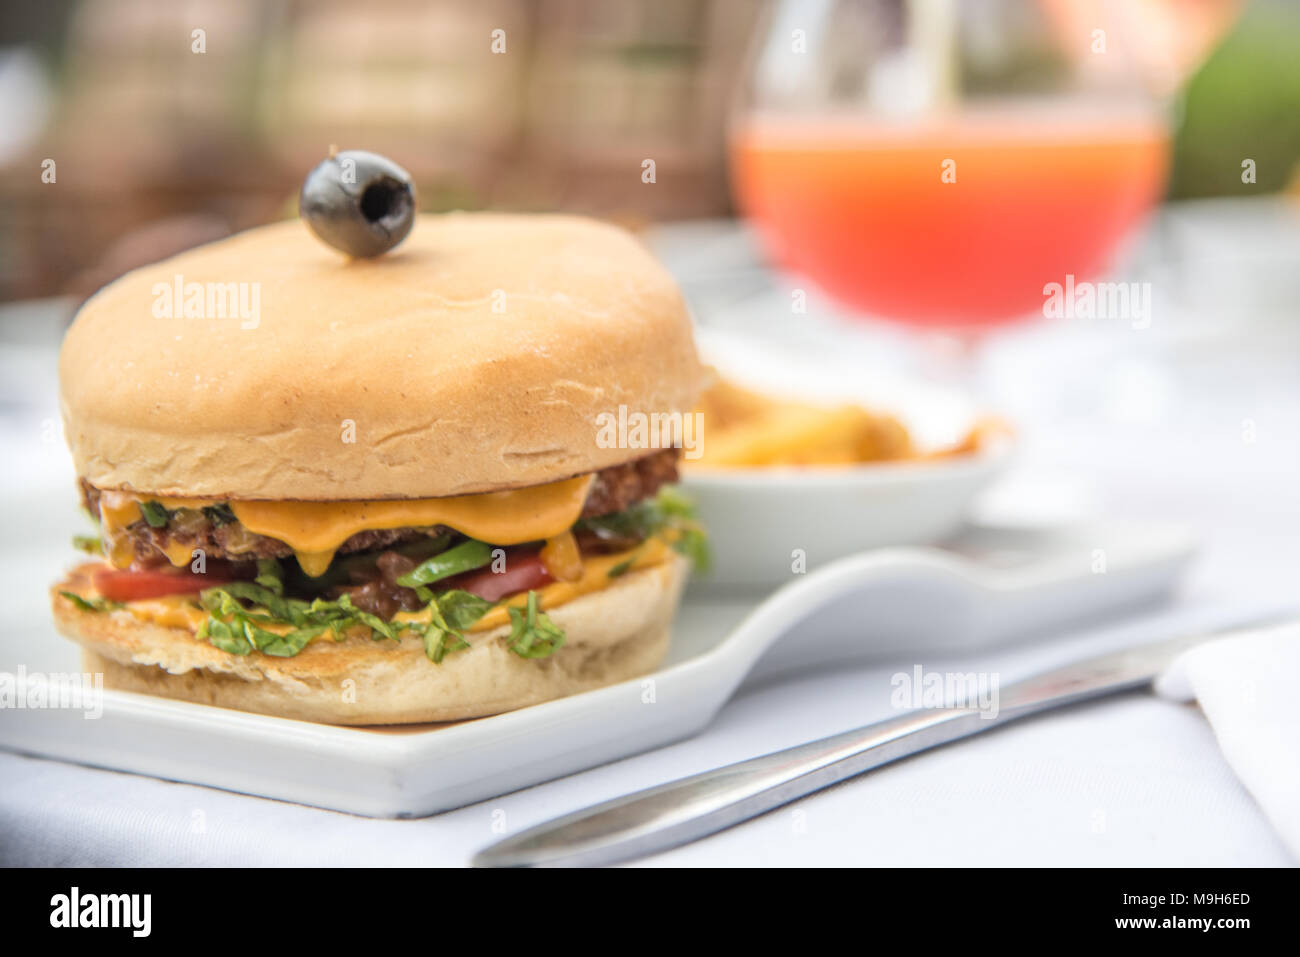 A shot of classic cheeseburger, topped with a black olive garnish. A bright orange cocktail/juice in the background. Stock Photo